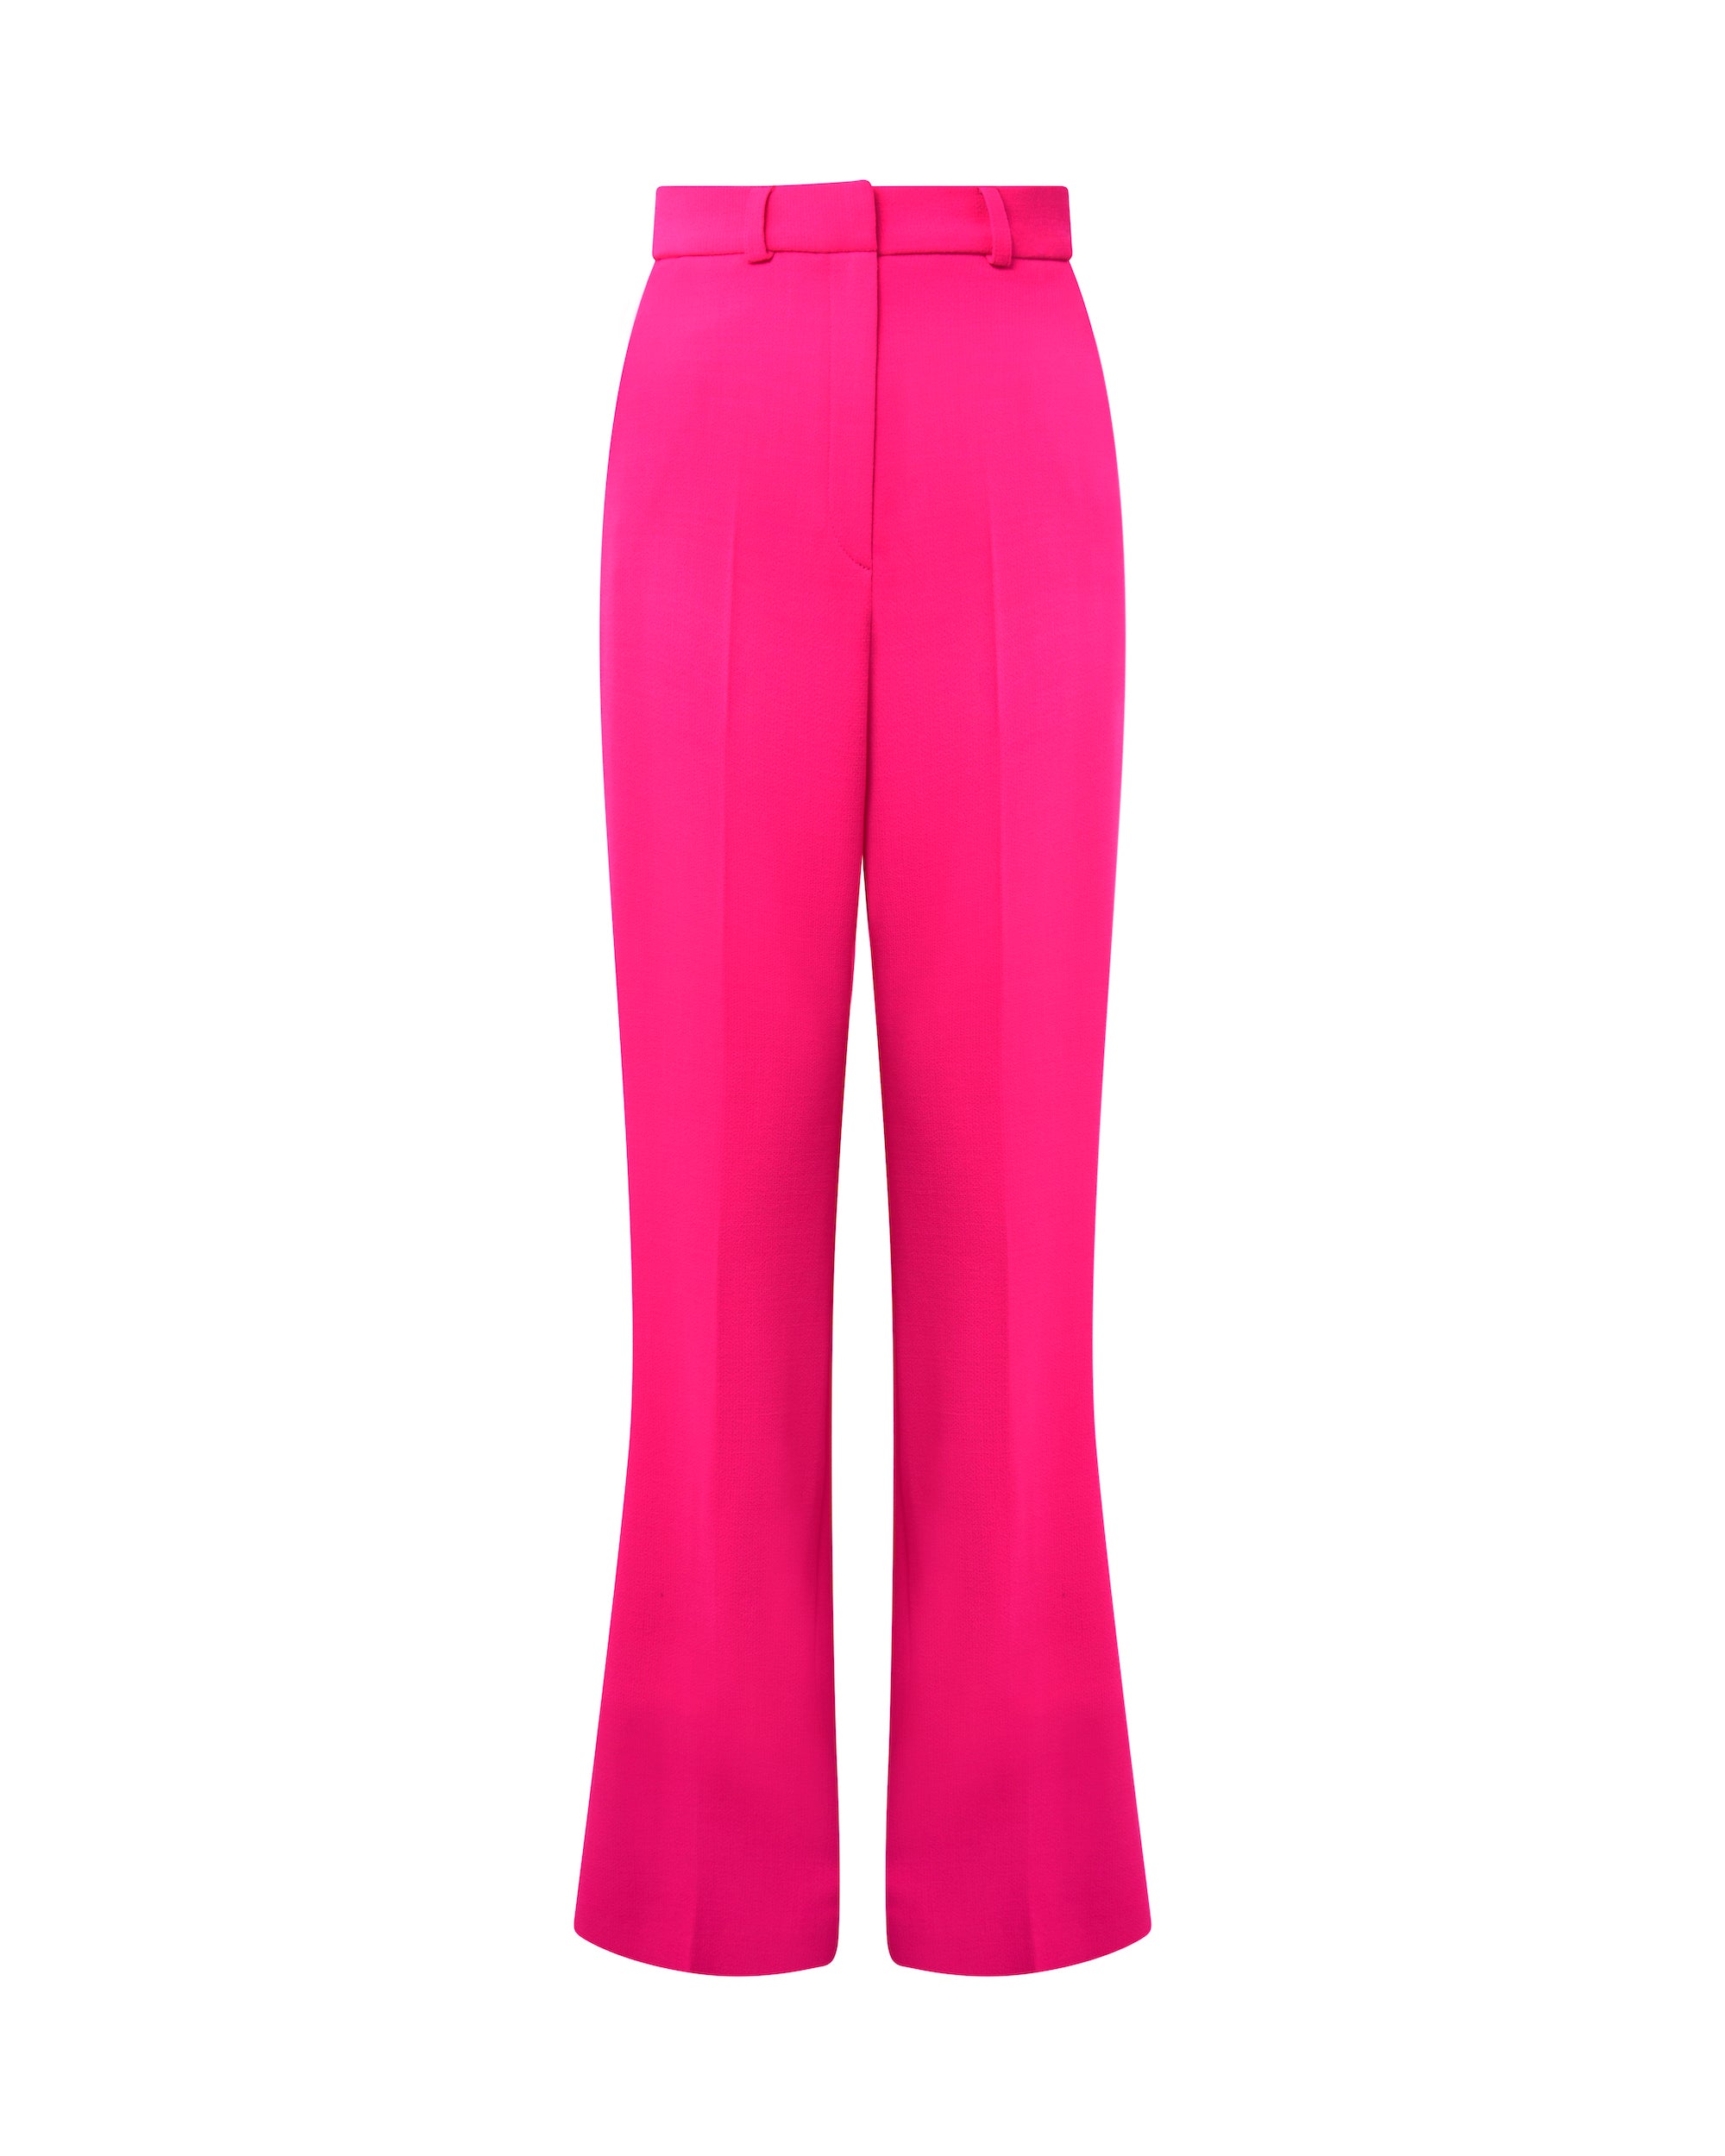 TAILORED FLARED TROUSERS IN PINK – David Koma